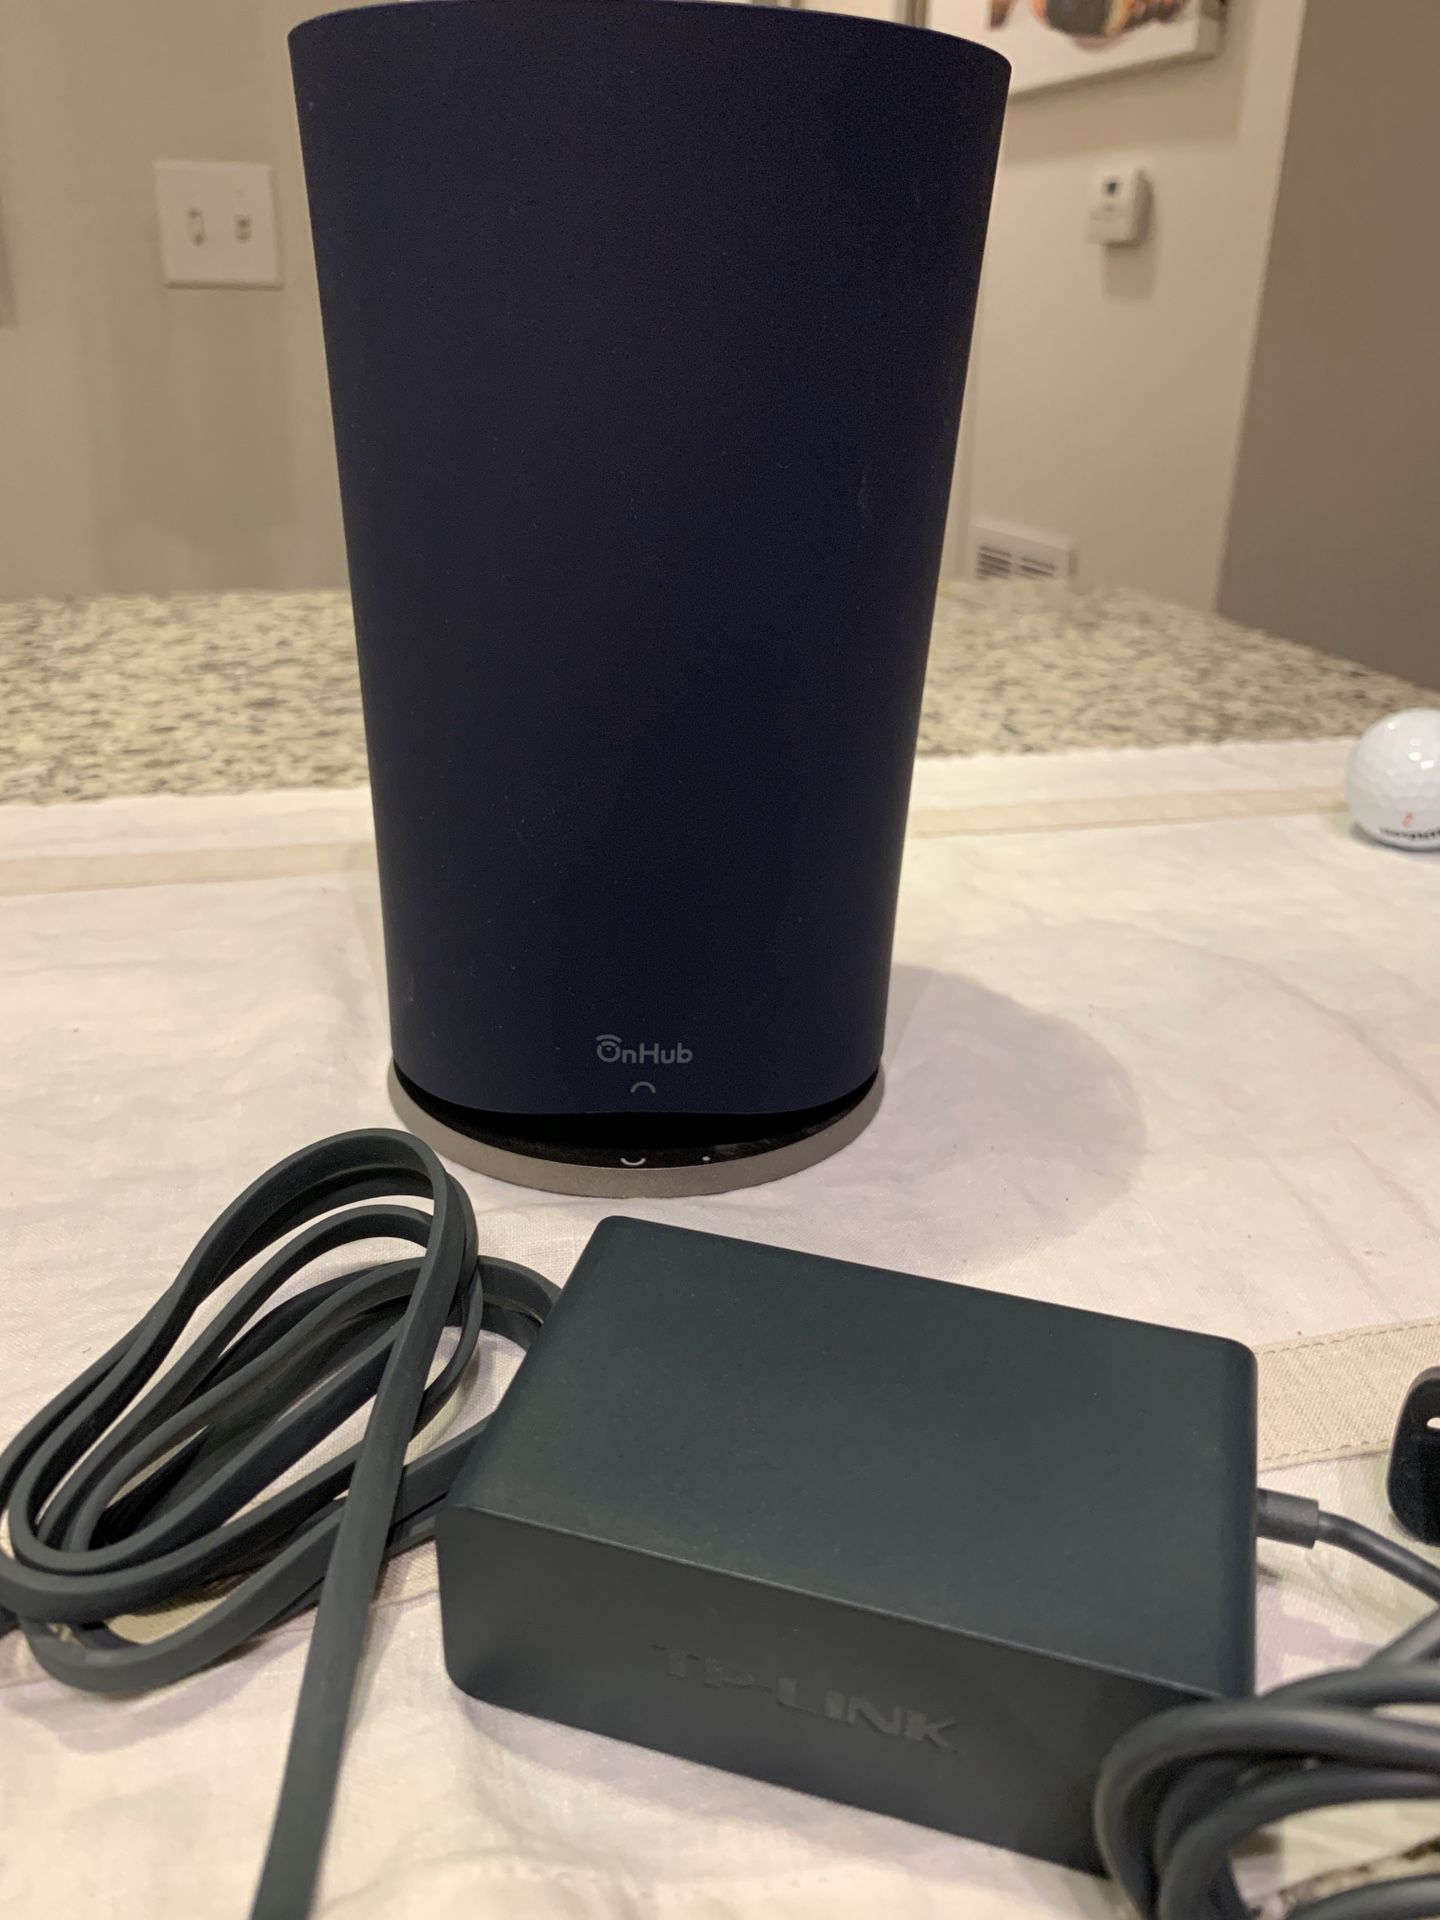 Google Onhub TP-Link WiFi Router